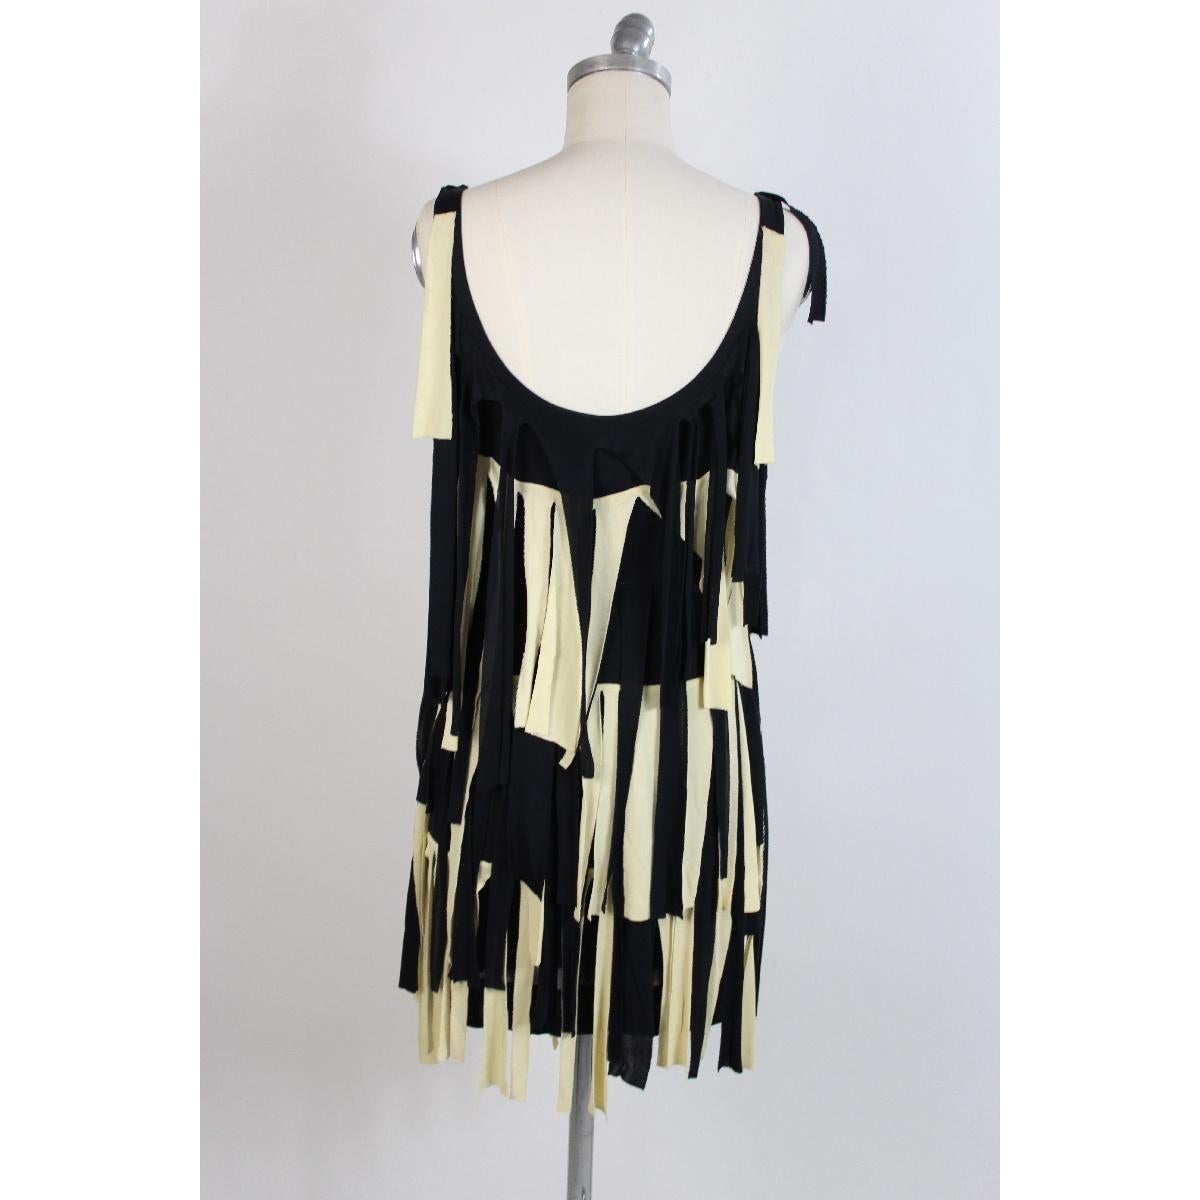 Moschino Couture vintage fringe dress, blue and beige, Charleston model sleeveless cotton. Made in Italy of 1990s in excellent condition.

Size 42 IT; 8 US; 10 UK

Shoulder: 42 cm
Bust / chest: 43 cm
Length: 74 cm